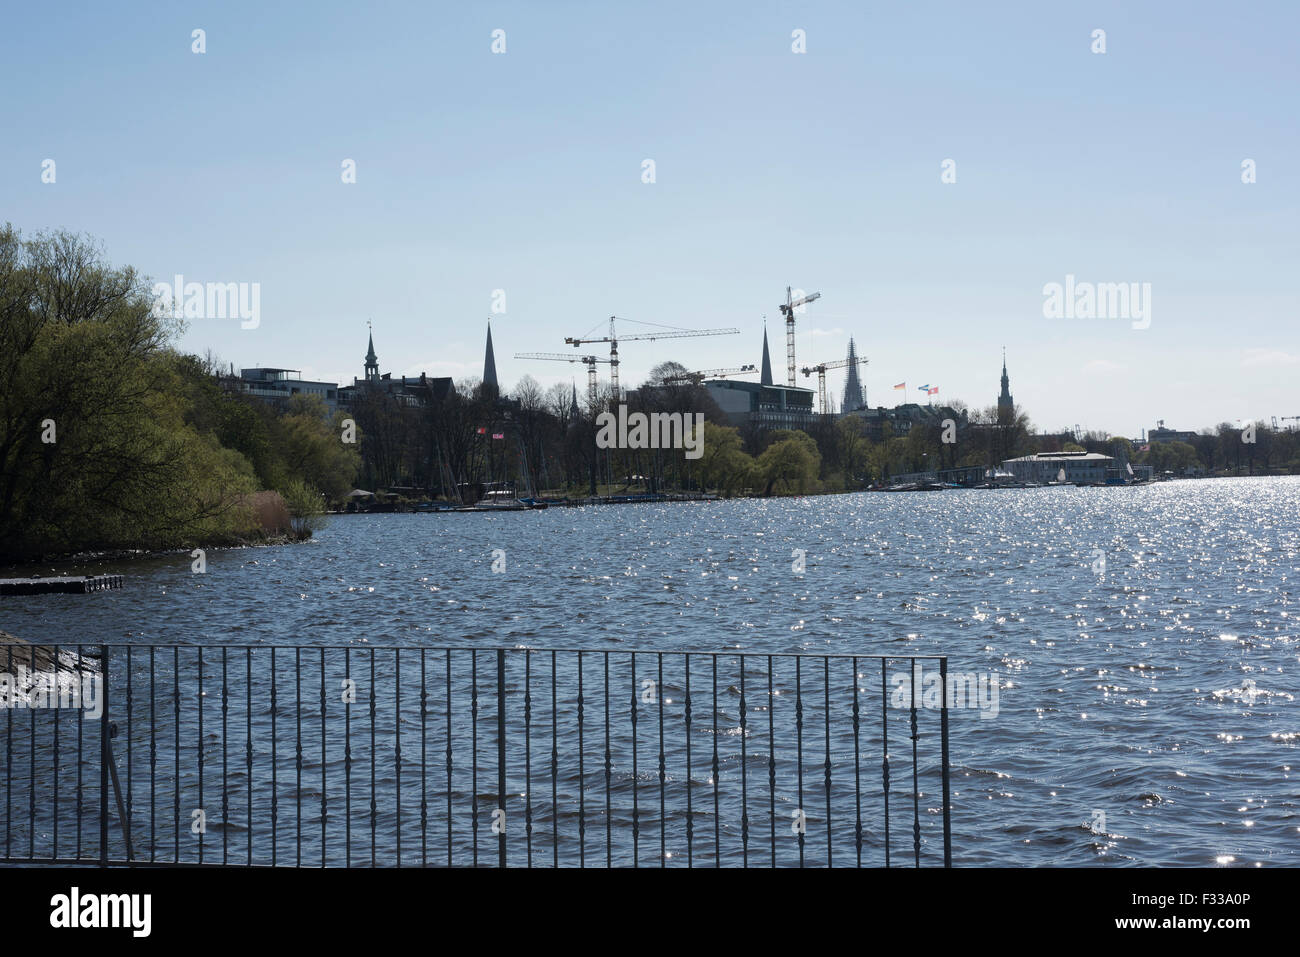 View across the Aussen Alster, the large lake in Hamburg, Germany. Stock Photo